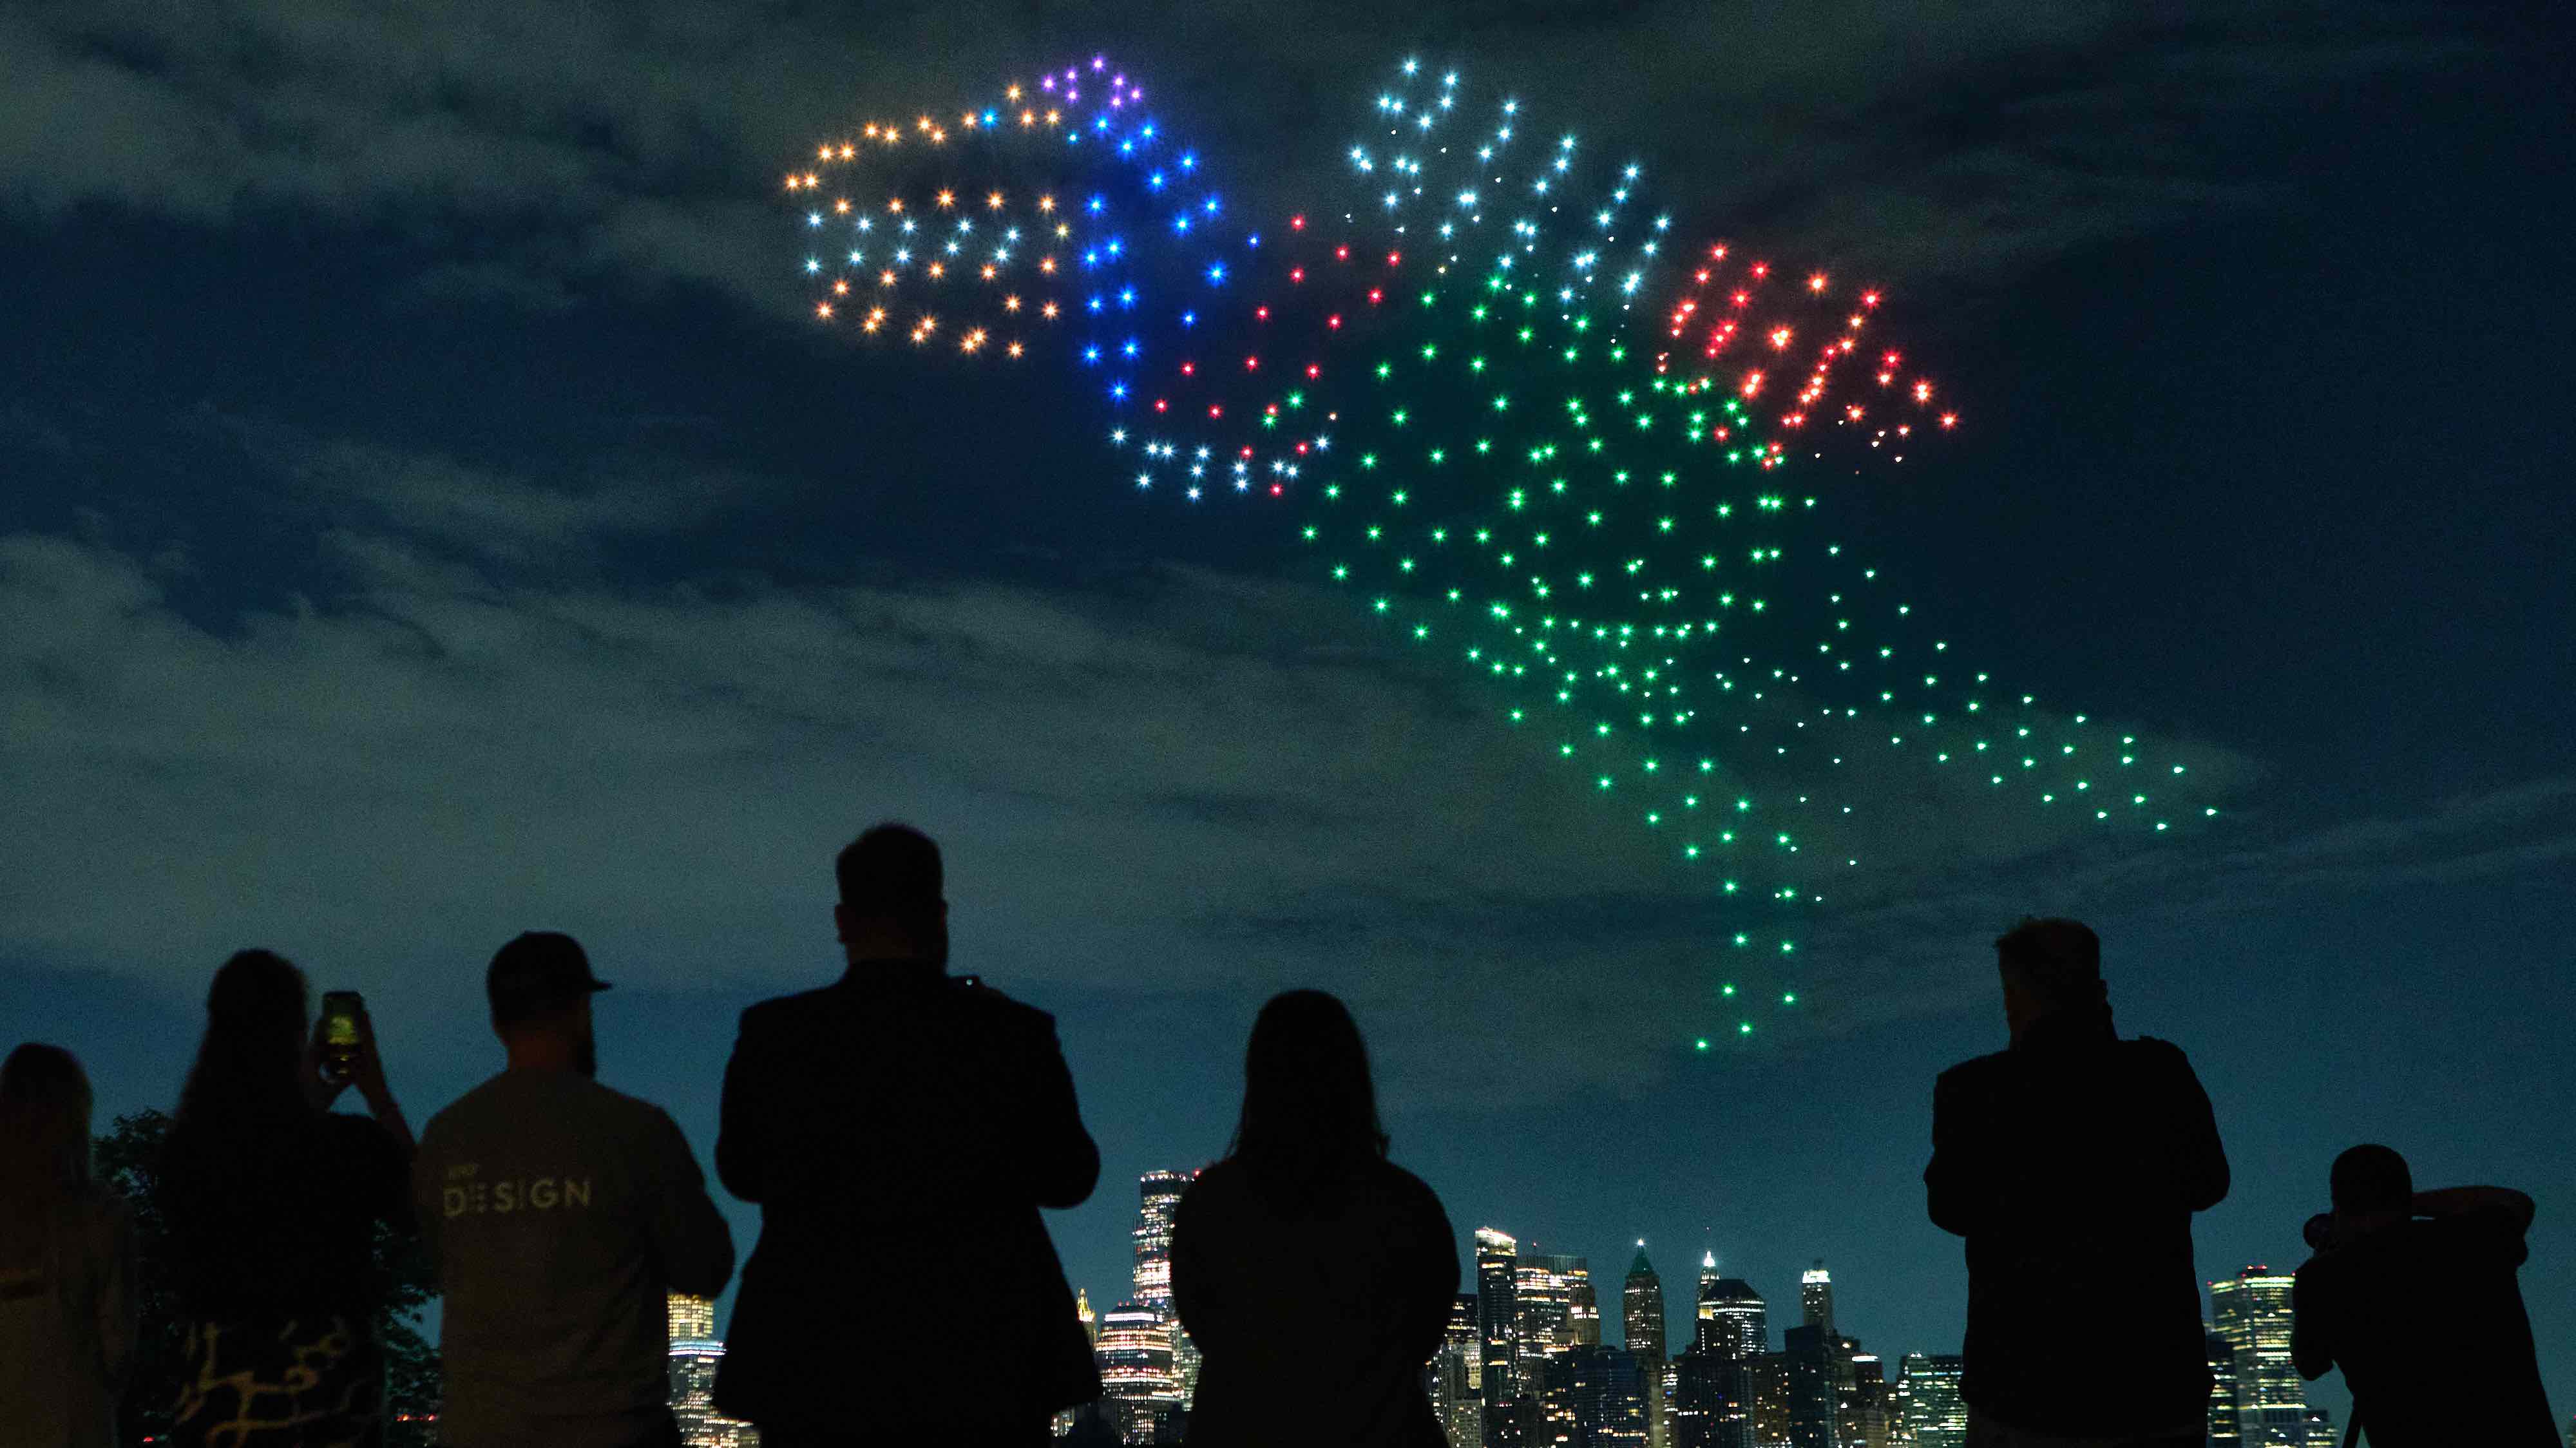 Lego drone show in NYC celebrating space.